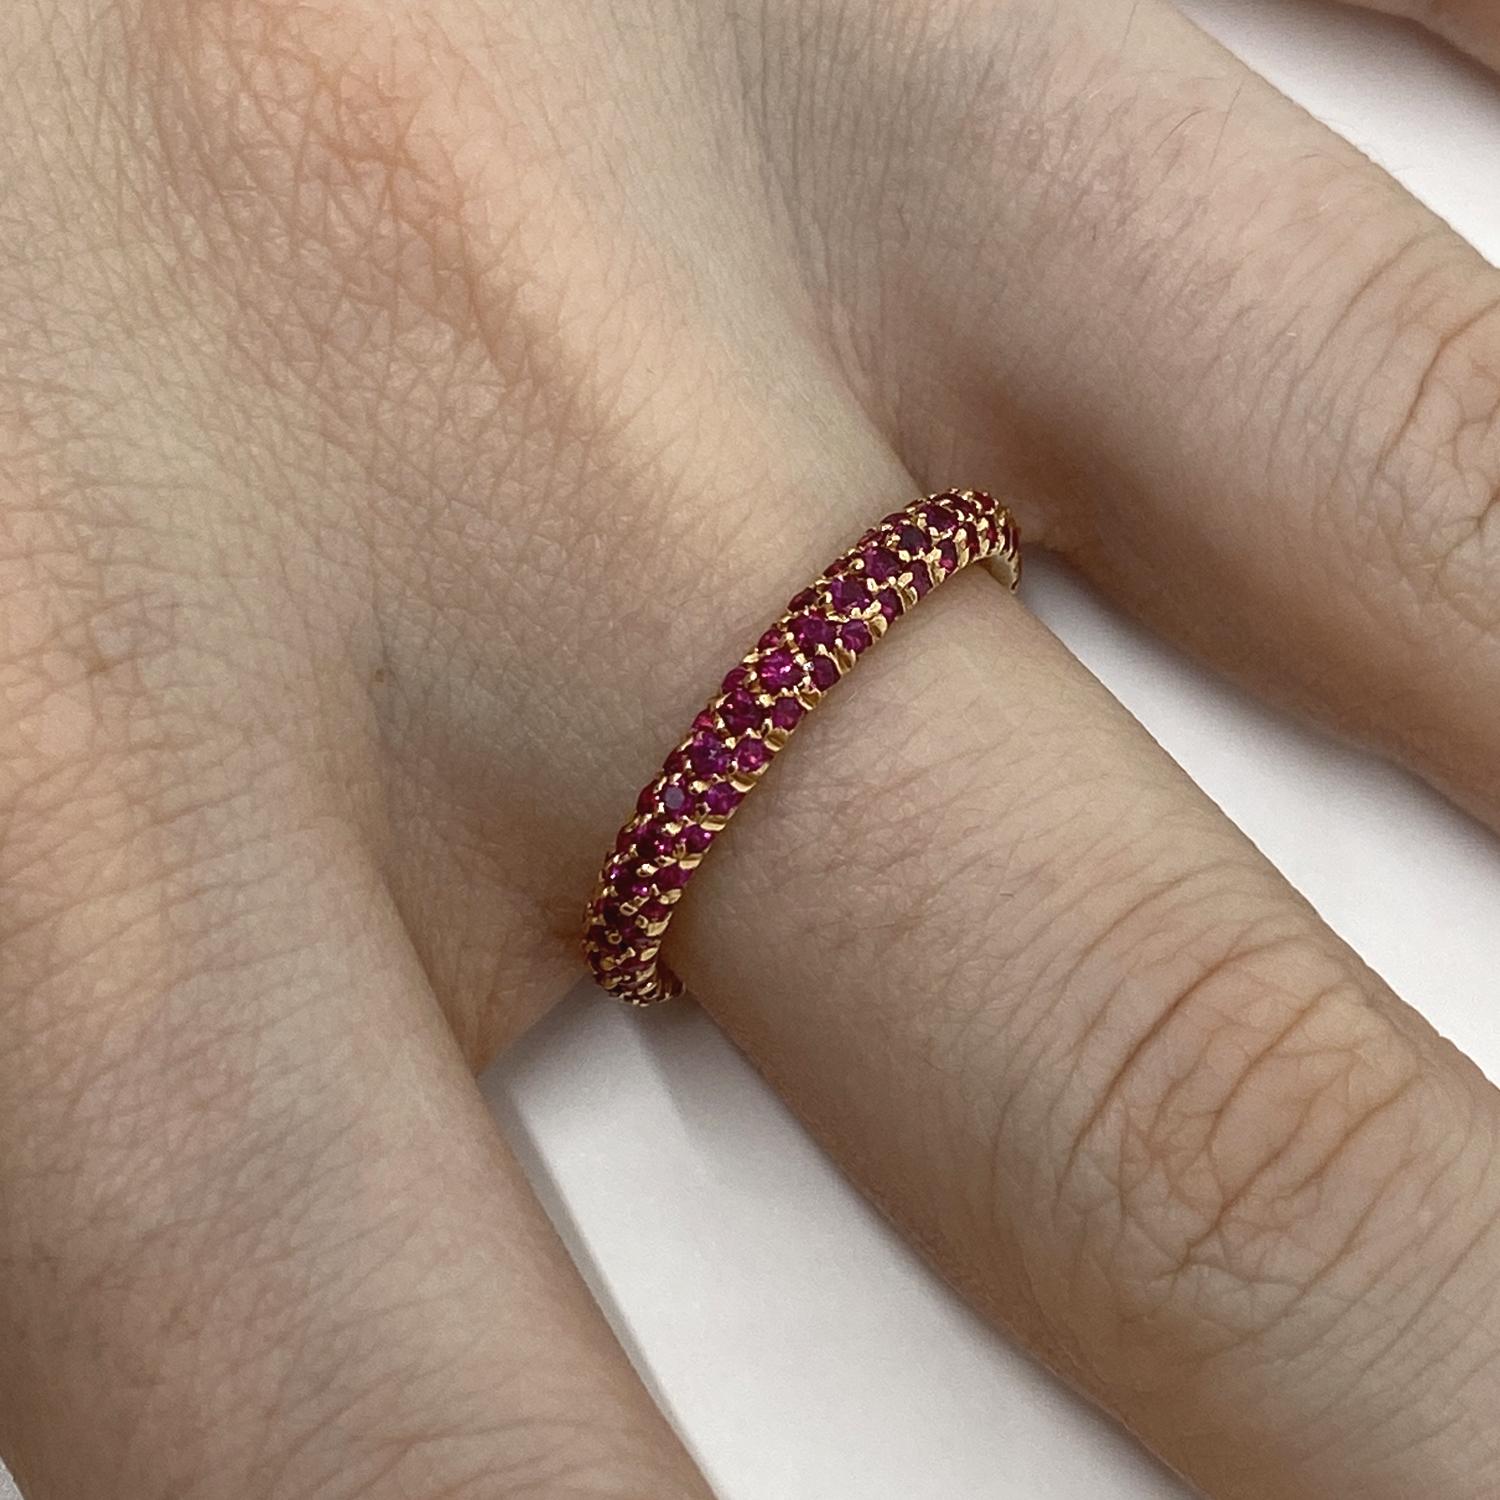 Ring made of 18 kt rose gold pavéed with natural brilliant-cut rubies for ct .1.37 

Welcome to our jewelry collection, where every piece tells a story of timeless elegance and unparalleled craftsmanship. As a family-run business in Italy for over